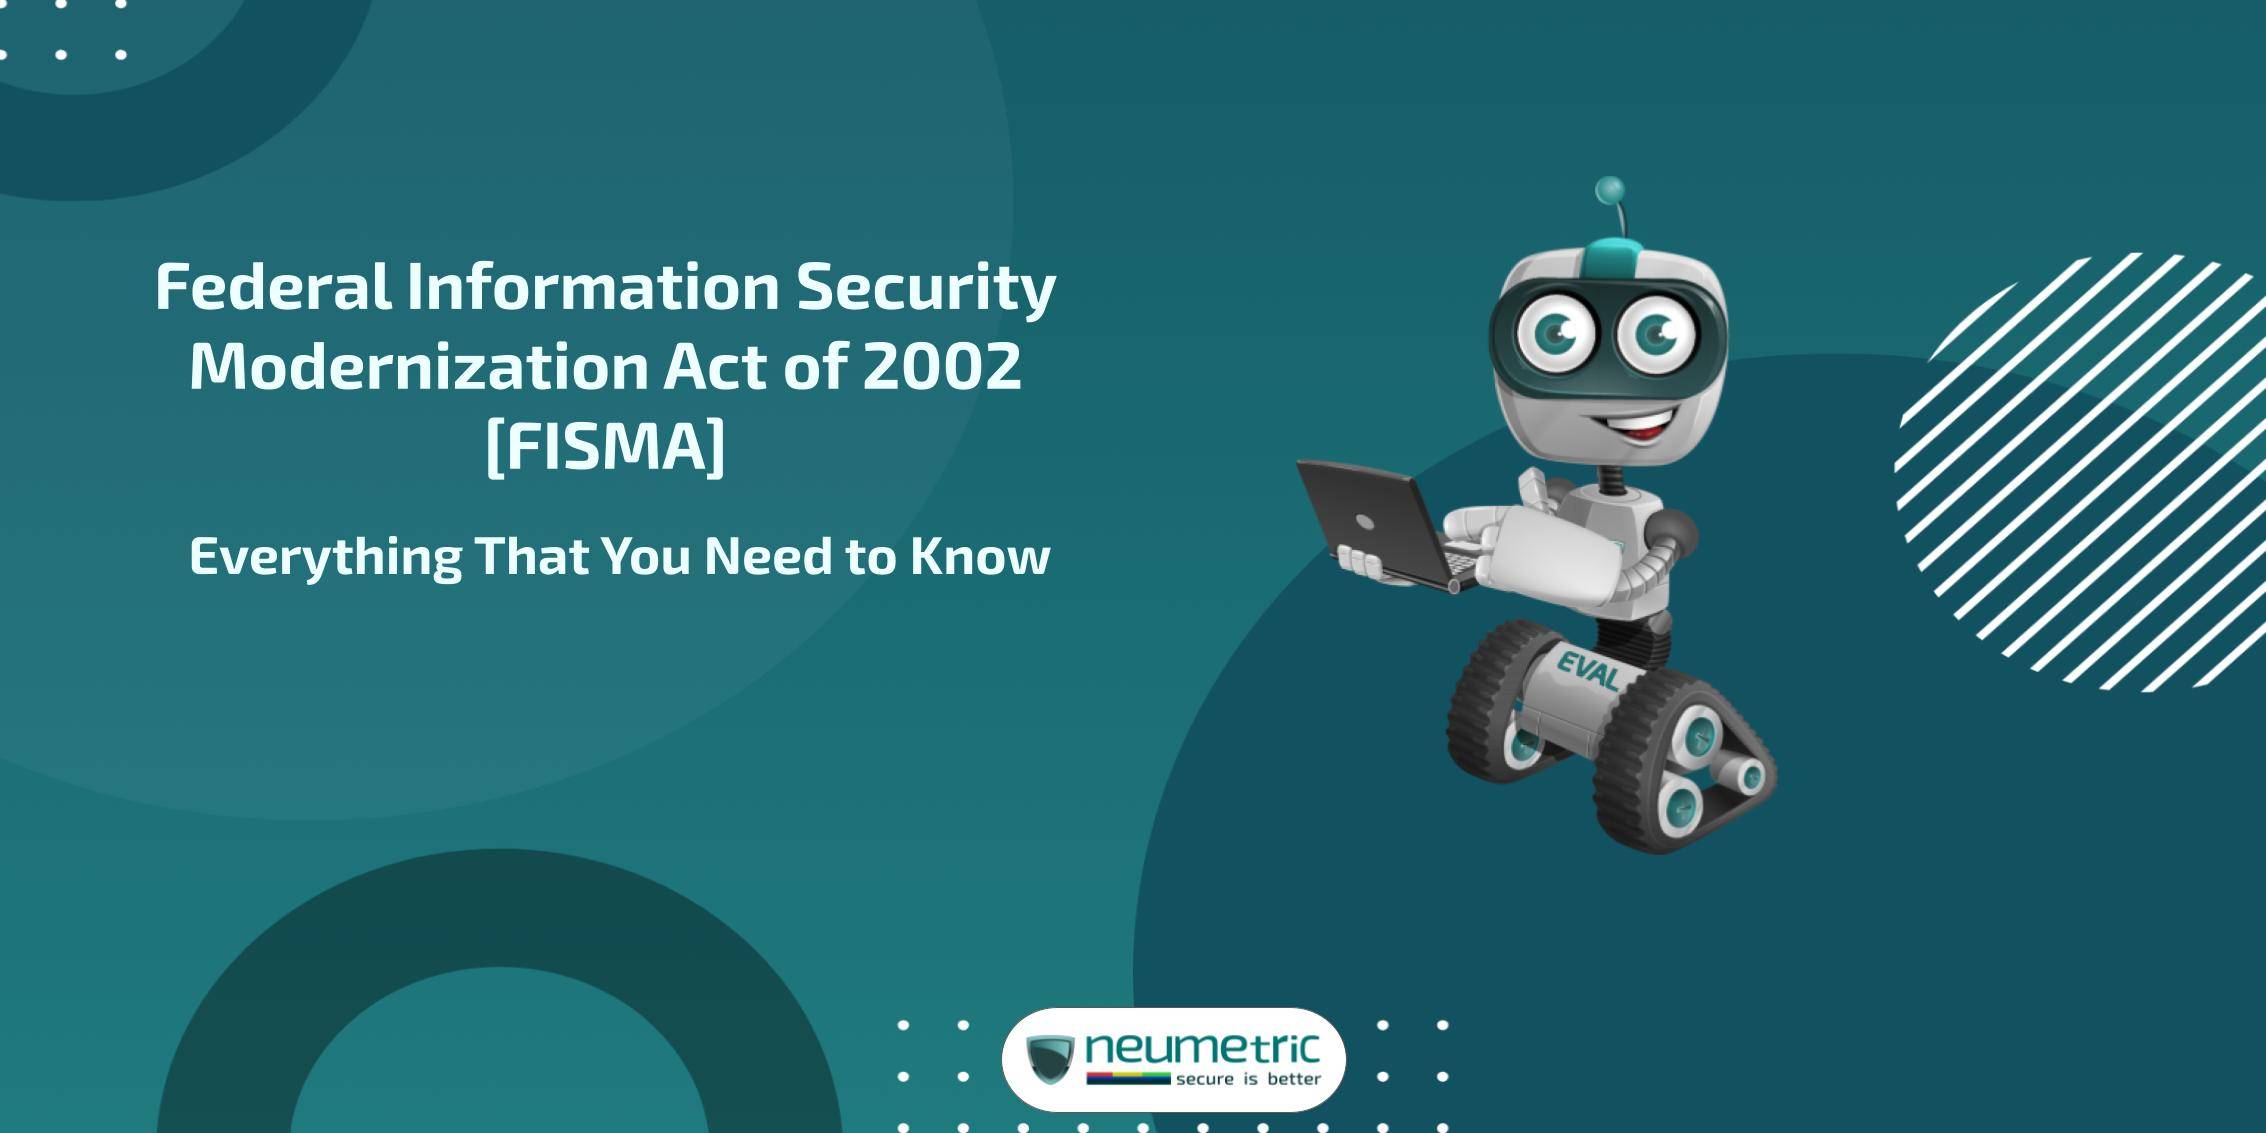 Federal Information Security Modernization Act of 2002 [FISMA]: Everything That You Need to Know